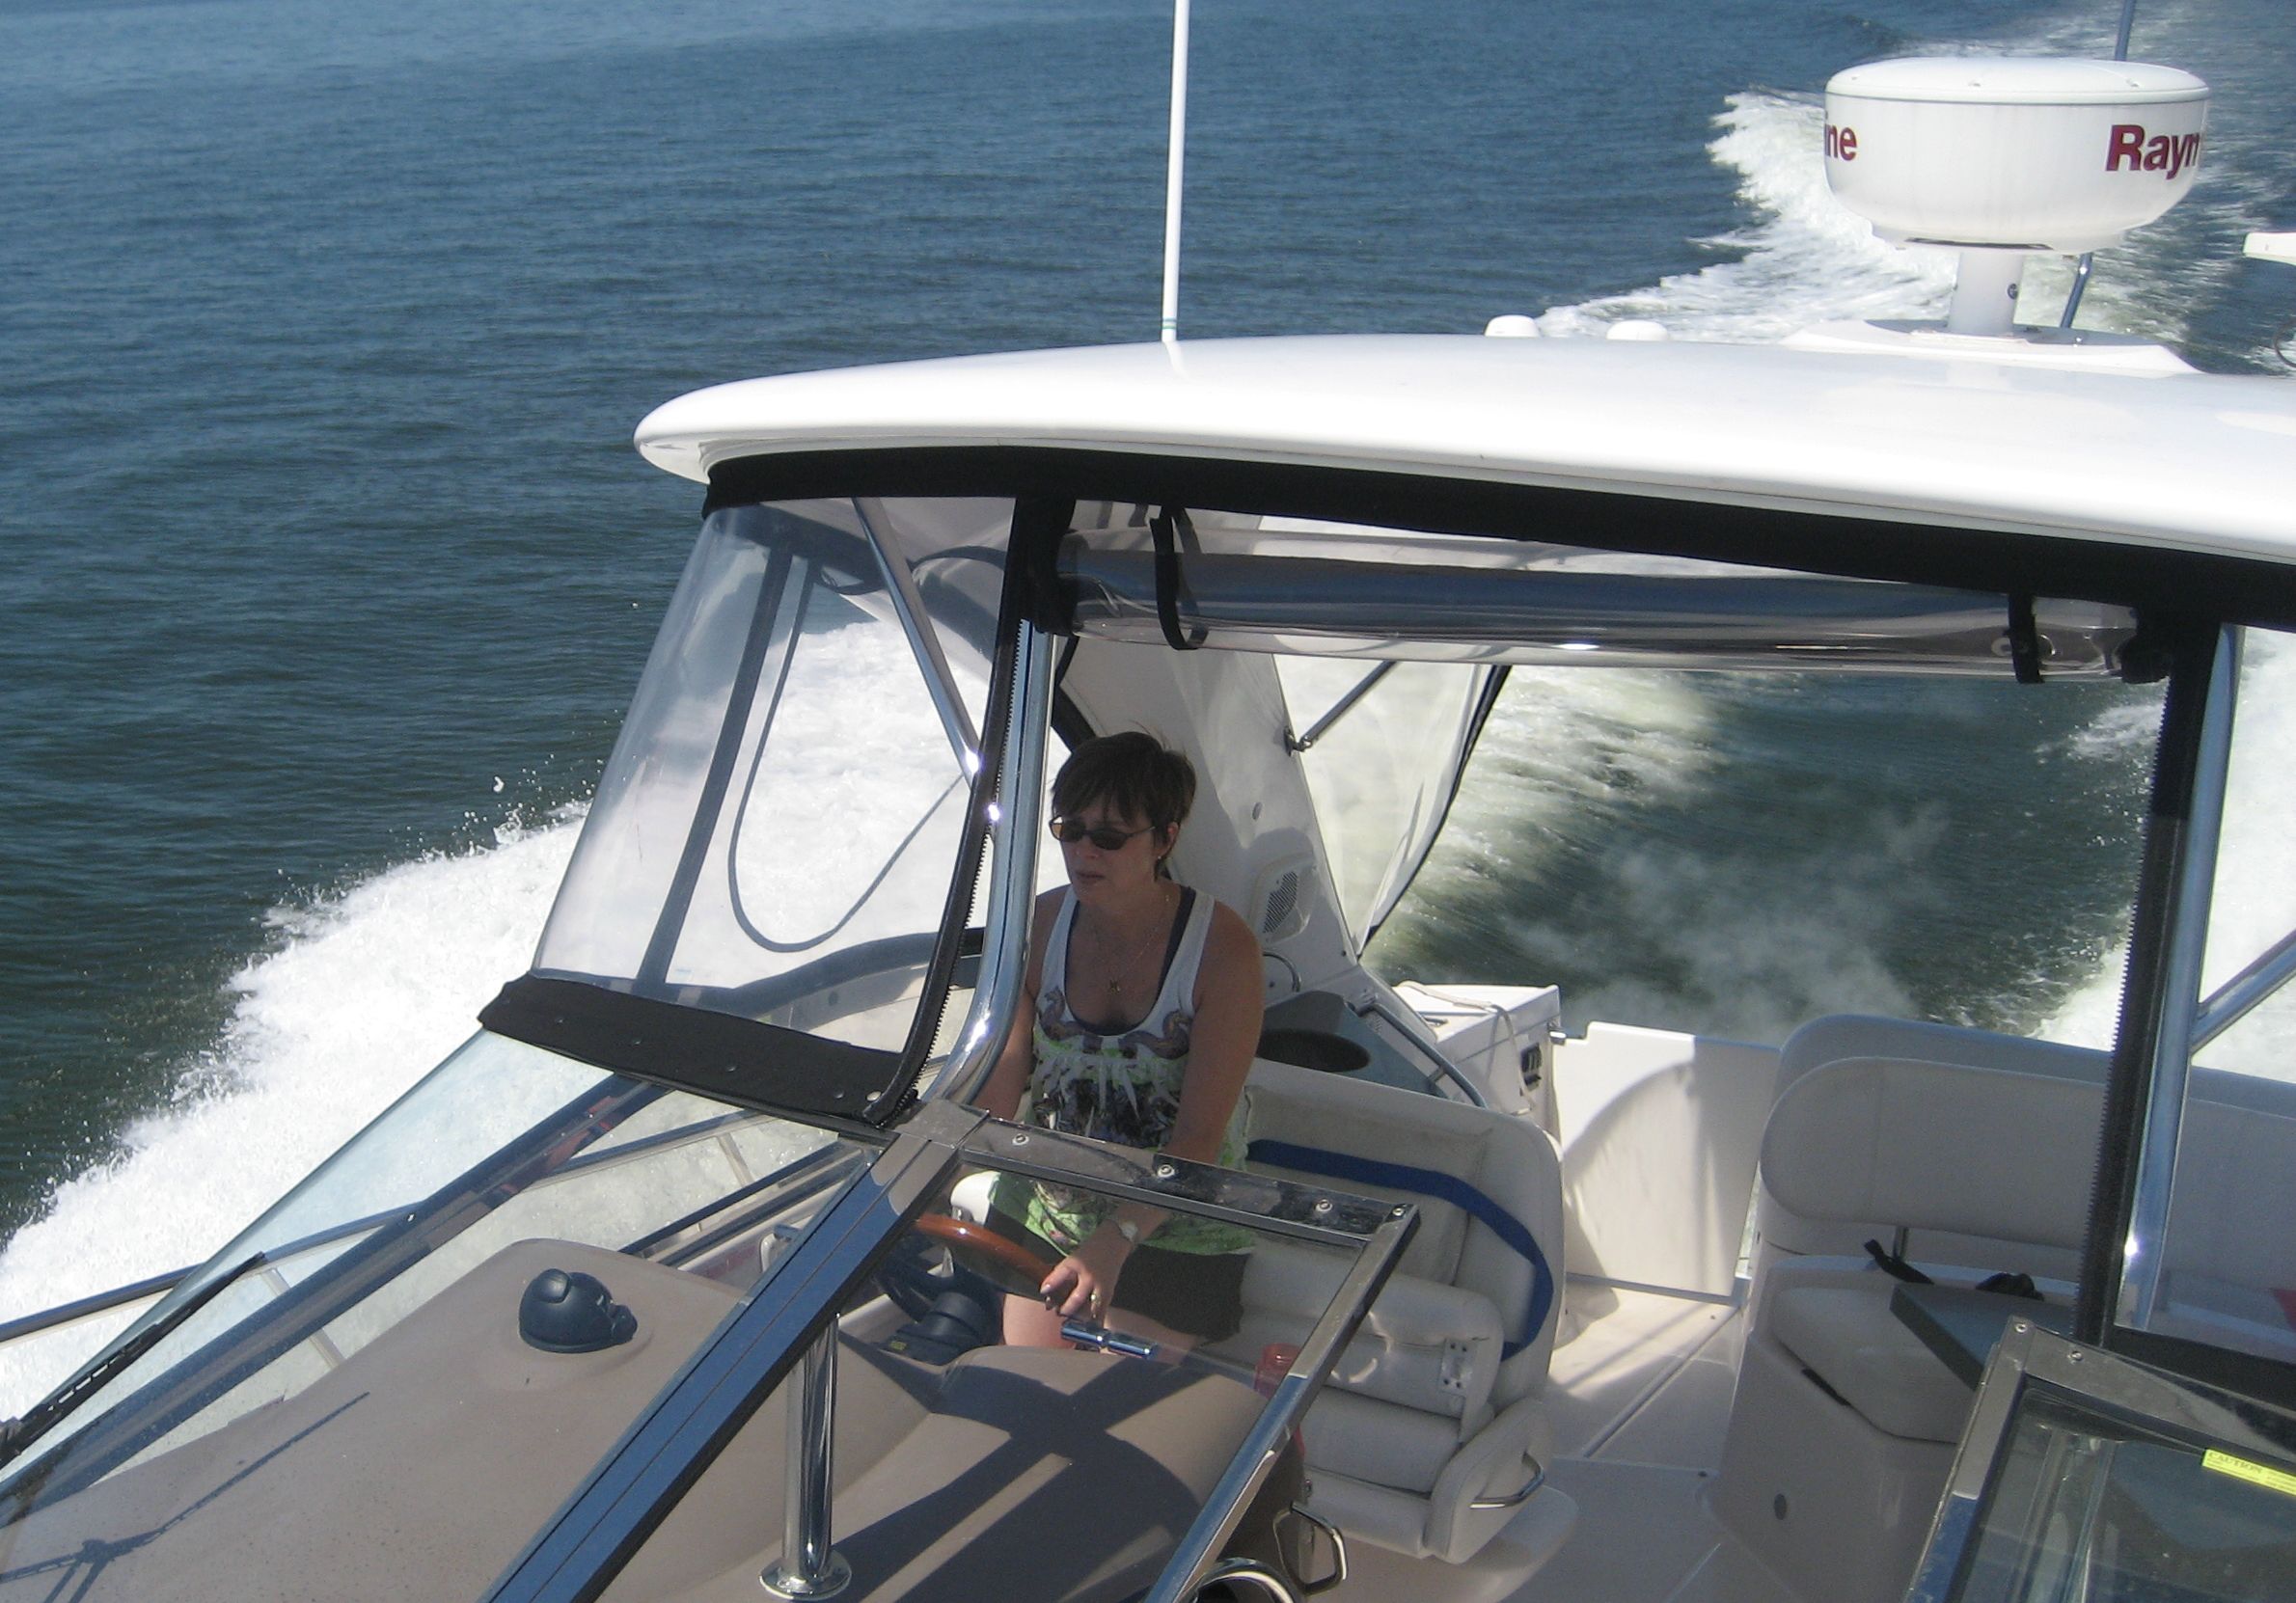 Stacey at the Helm of a Regal 4060